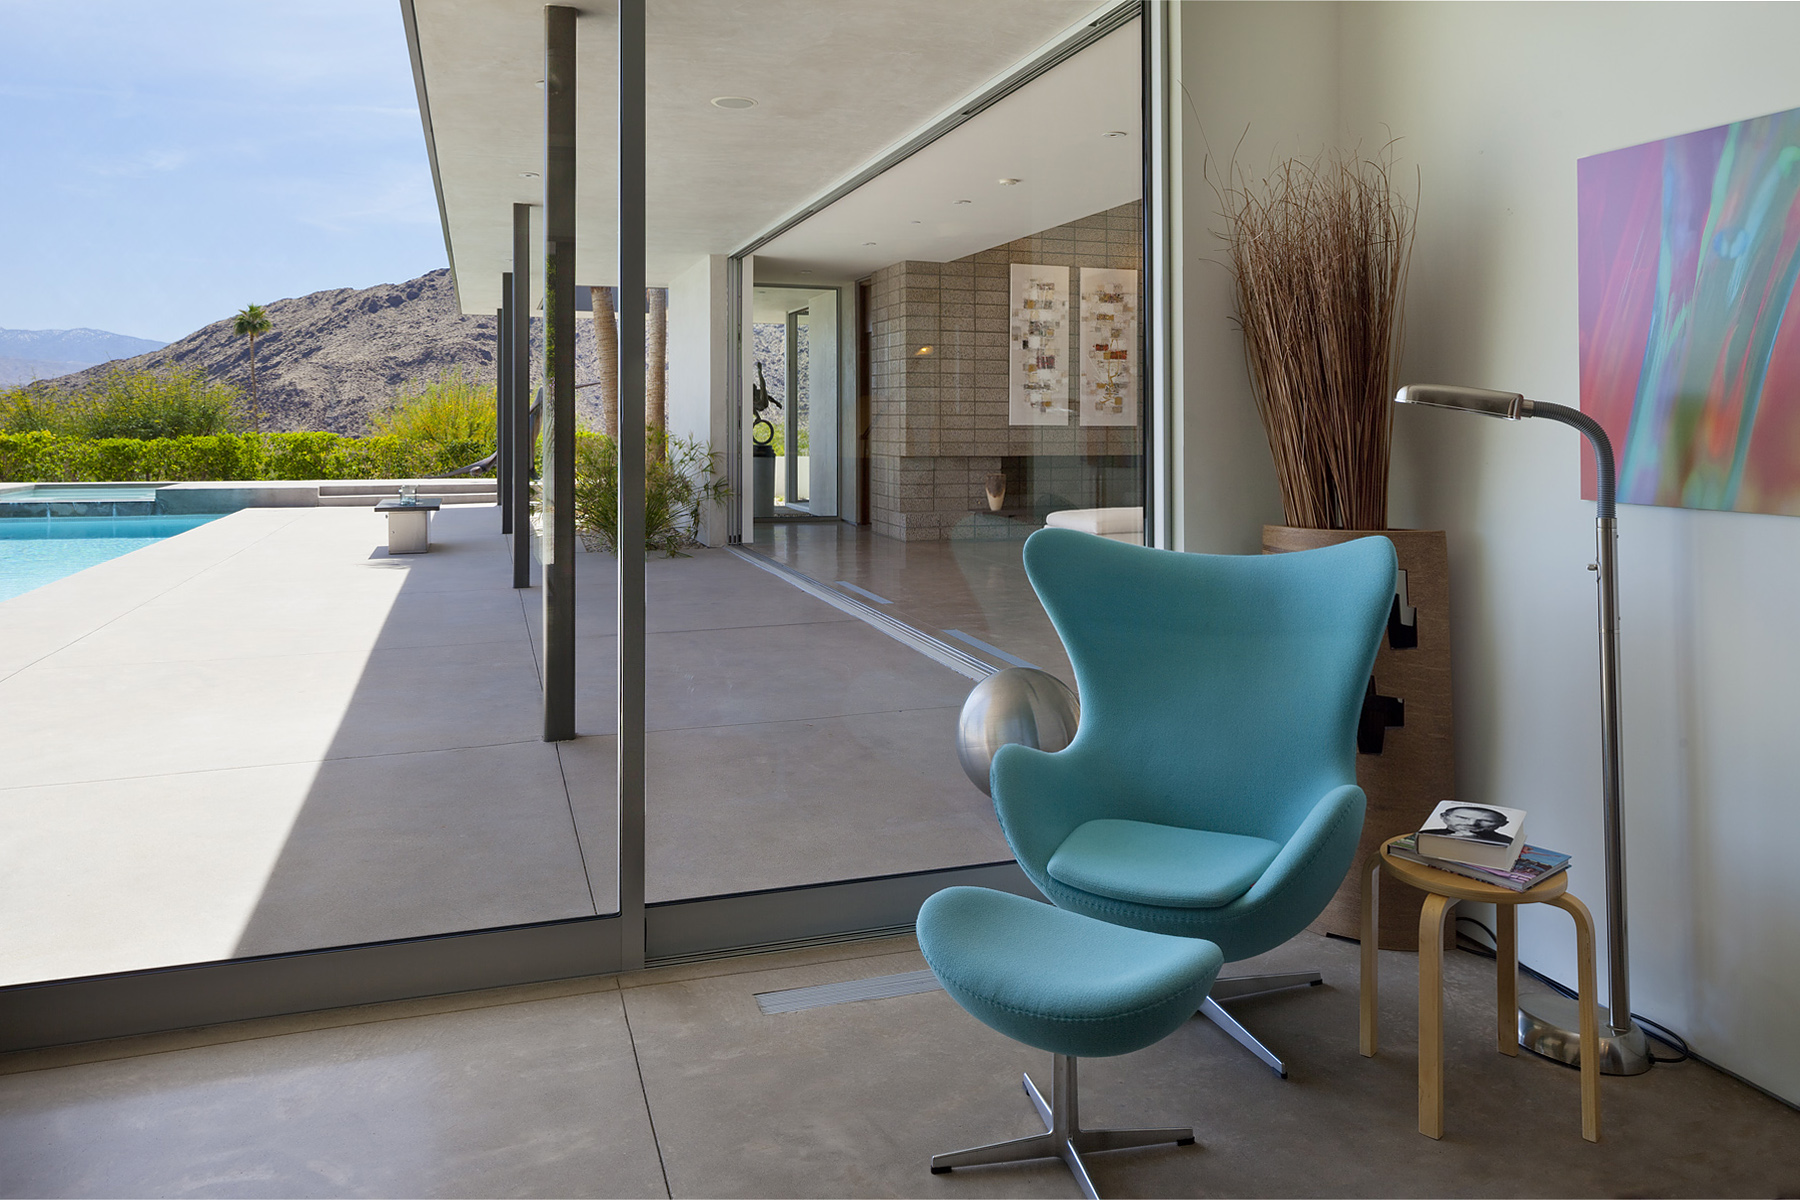 Residential Photography, Palm Springs